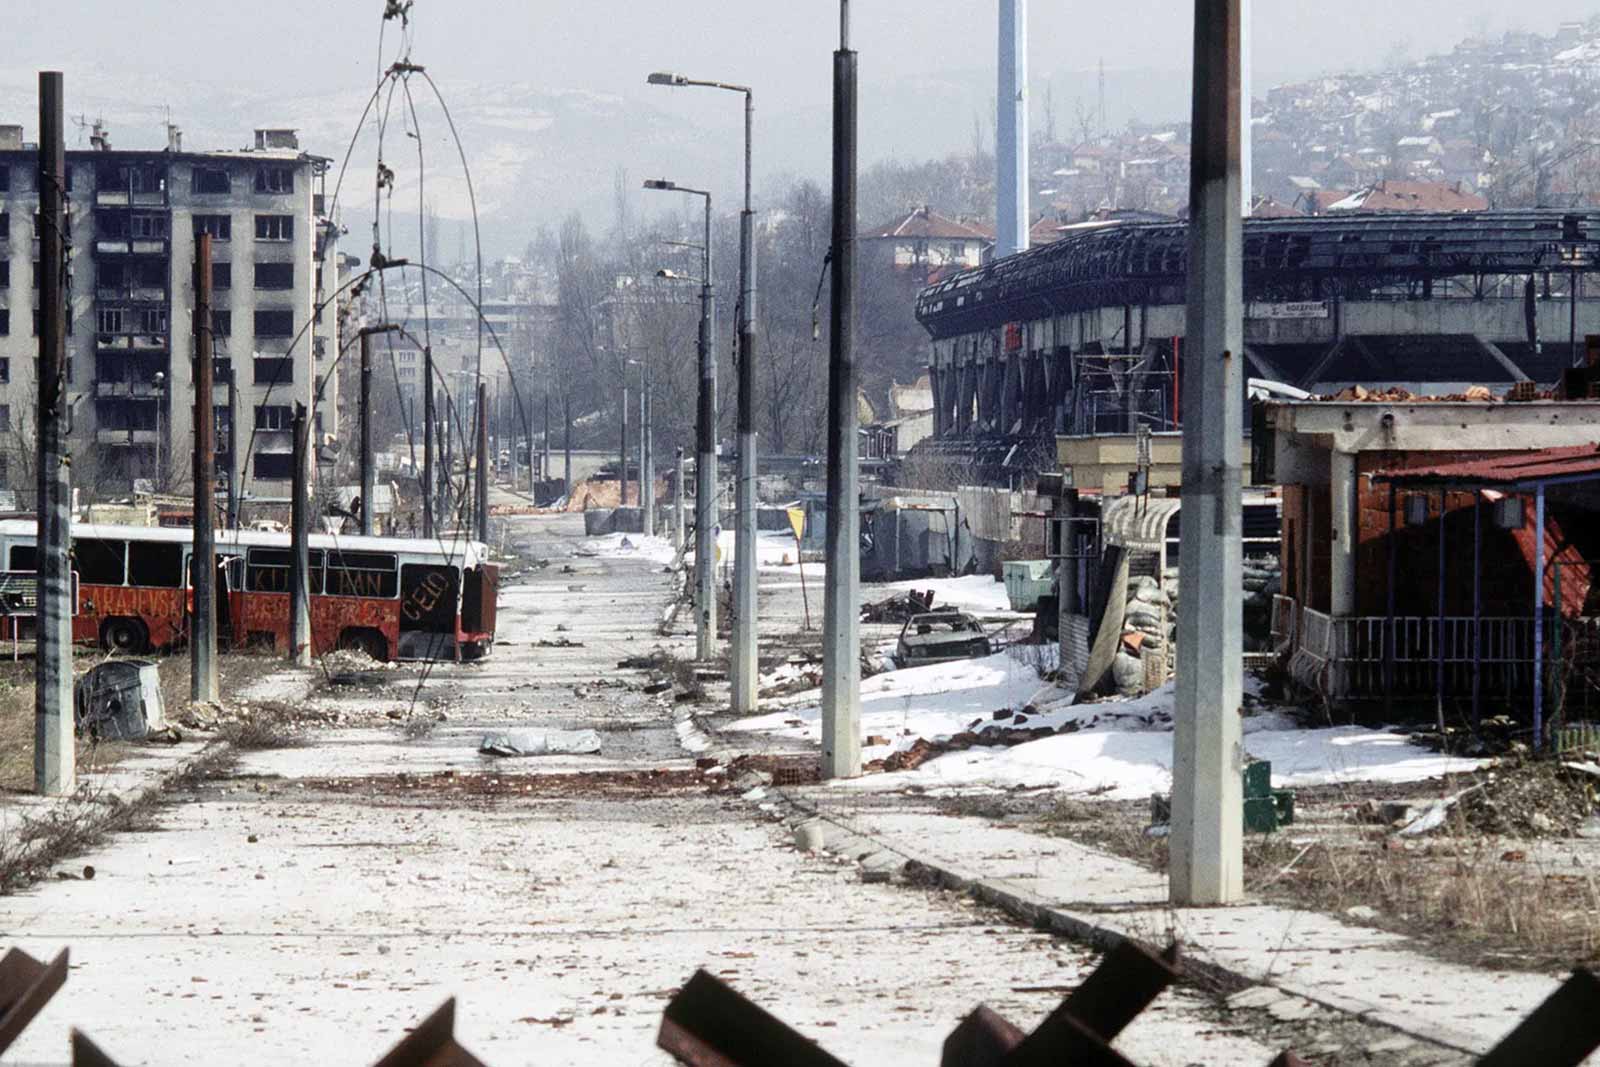 Buildings and vehicles destroyed in Grbavica, a suburb of Sarajevo, Bosnia and Herzegovina, during the Bosnian conflict (1992–95). © Lt. Stacey Wyzkowski/U.S. Department of Defense